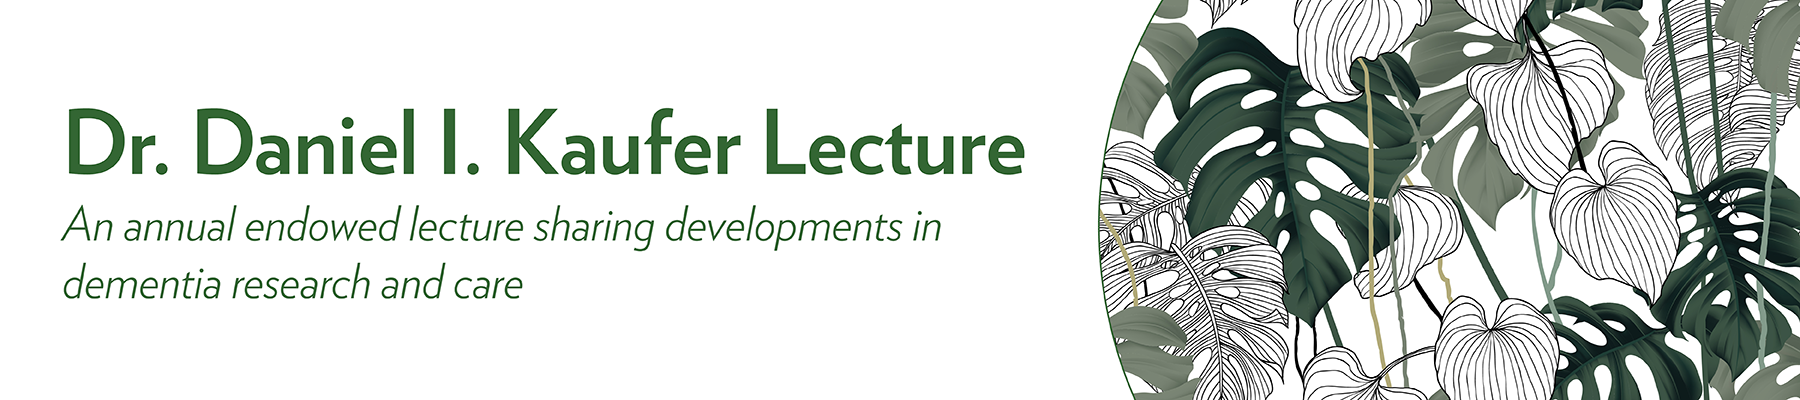 Website header includes illustration of house plants in various shades of green with the text Dr. Daniel I. Kaufer Lecture, An annual endowed lecture sharing developments in dementia research and care